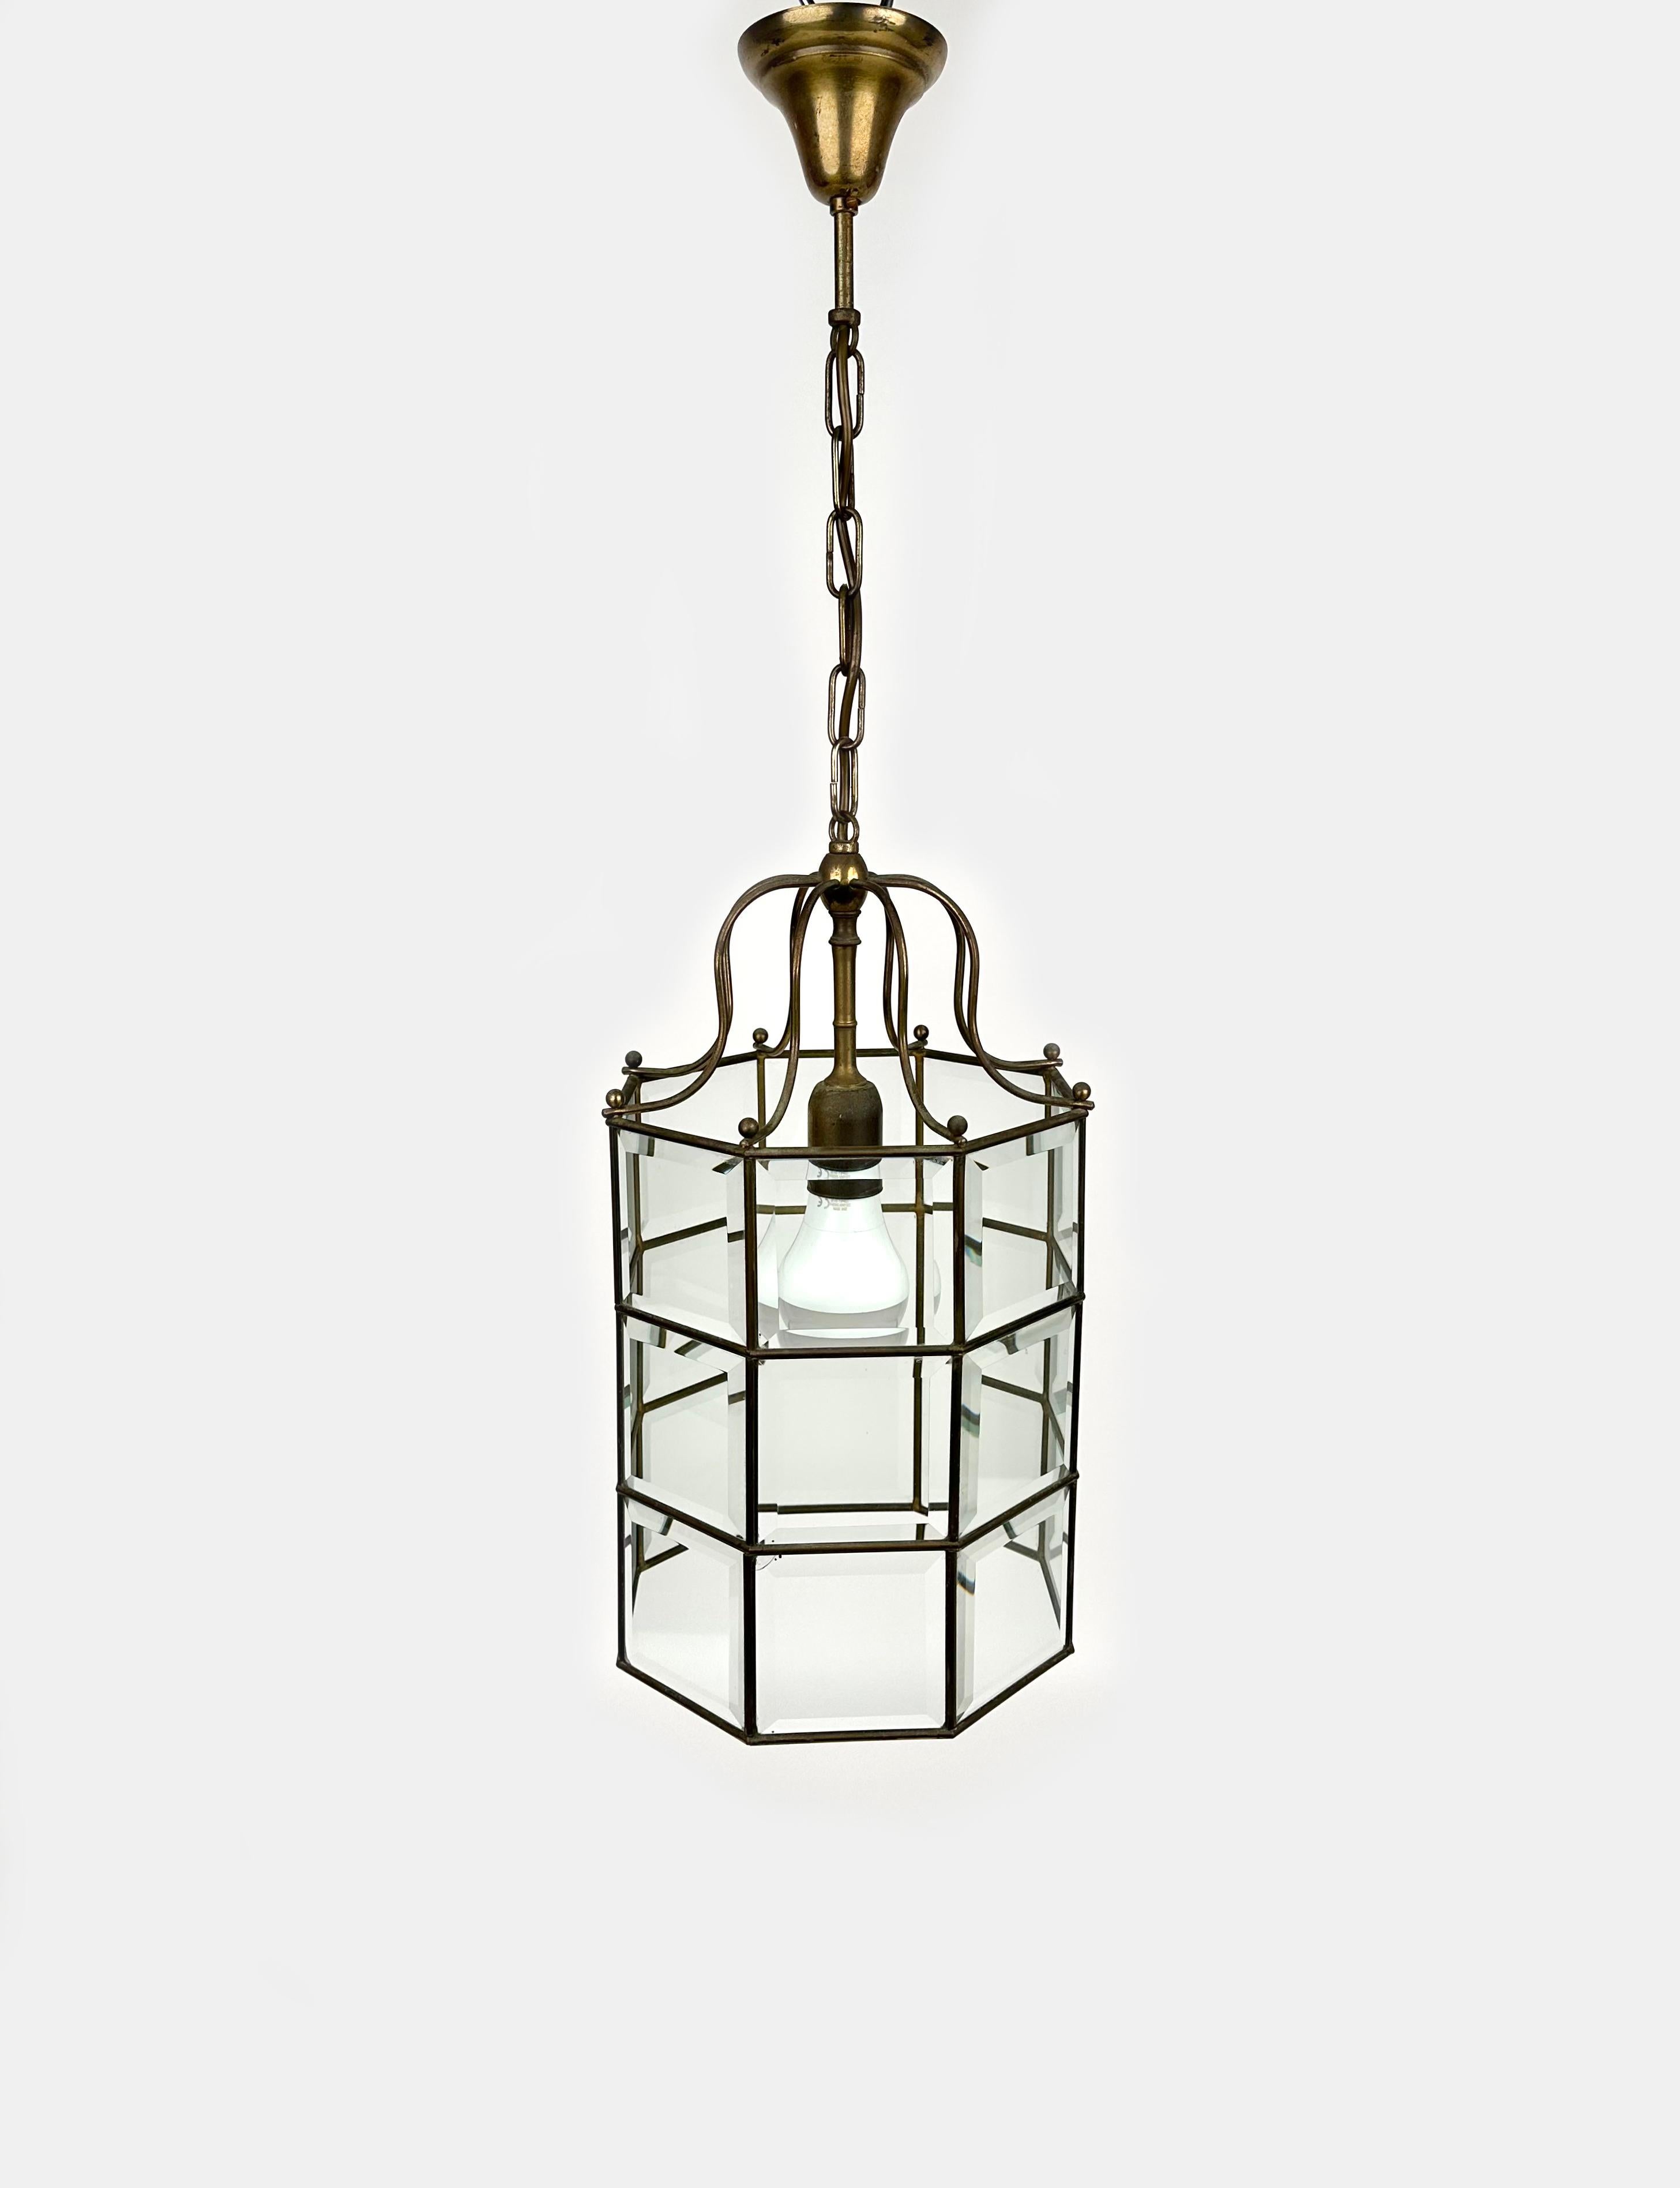 Italian Brass and Beveled Glass Pendant Lantern Adolf Loos Style, Italy 1950s For Sale